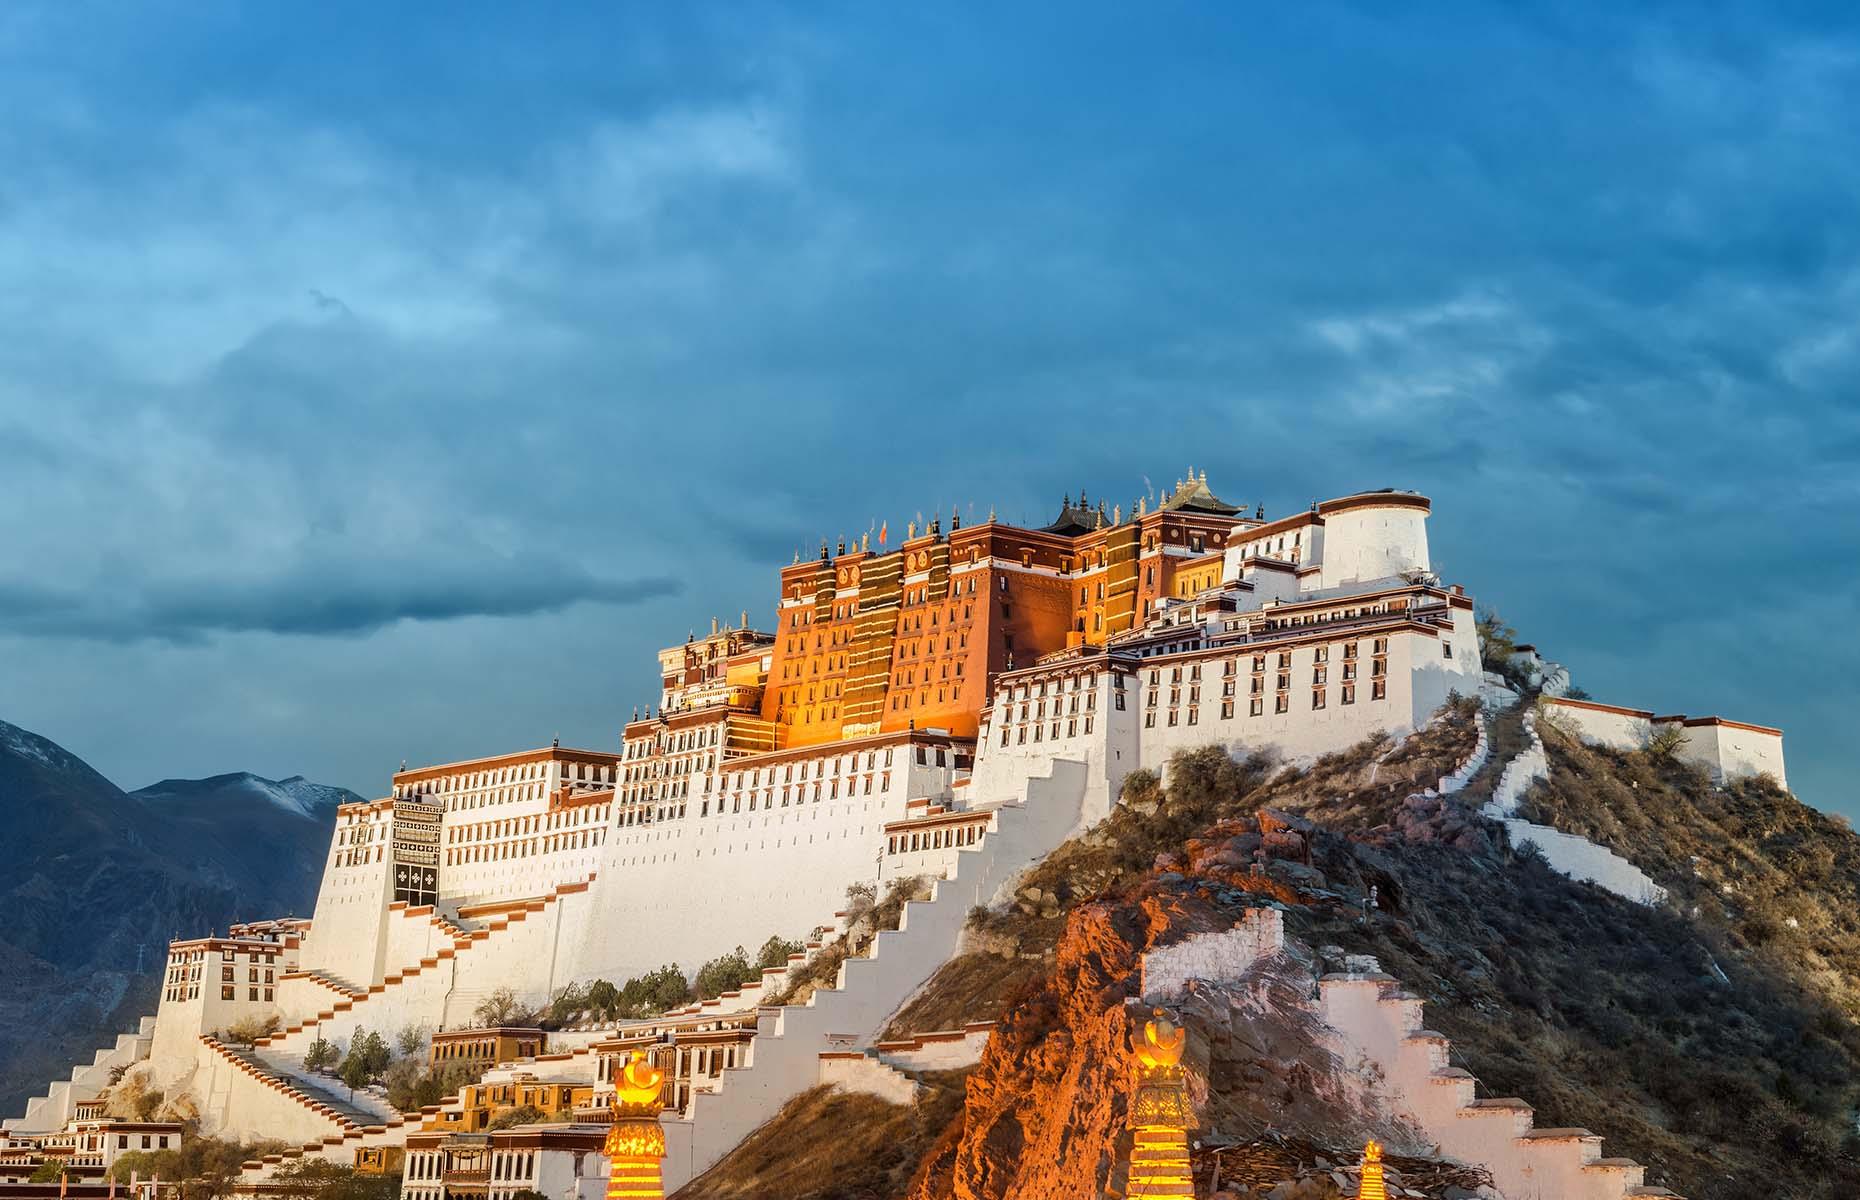 <p>The Holy City, the Place of the Gods, the center of Tibetan Buddhism – Lhasa has a lot to live up to. But it would be hard not to be moved by the first sight of Potala Palace or the fervor of pilgrims walking the Barkhor circuit around the Jokhang temple in winding, incense-scented alleys. Perhaps it’s the altitude, but Lhasa seems to have something magical about it.</p>  <p><a href="https://www.loveexploring.com/galleries/94483/the-most-wonderful-views-on-earth?page=1"><strong>Now take a look at the most wonderful views on Earth</strong></a></p>